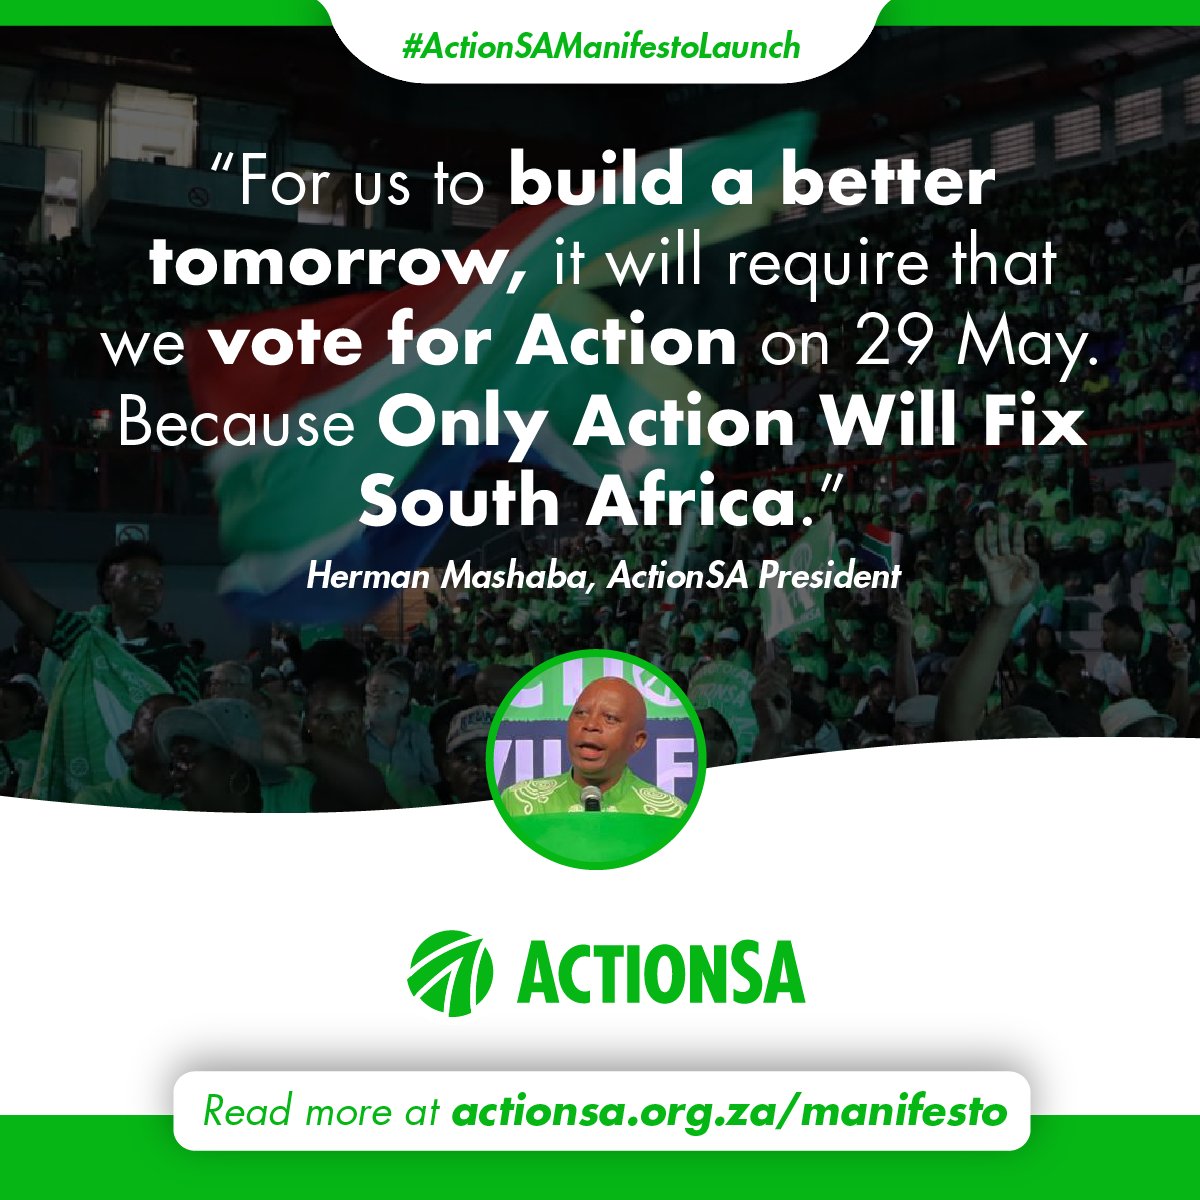 Only ACTION will fix South Africa. 💚🇿🇦 #ActionSAManifestoLaunch